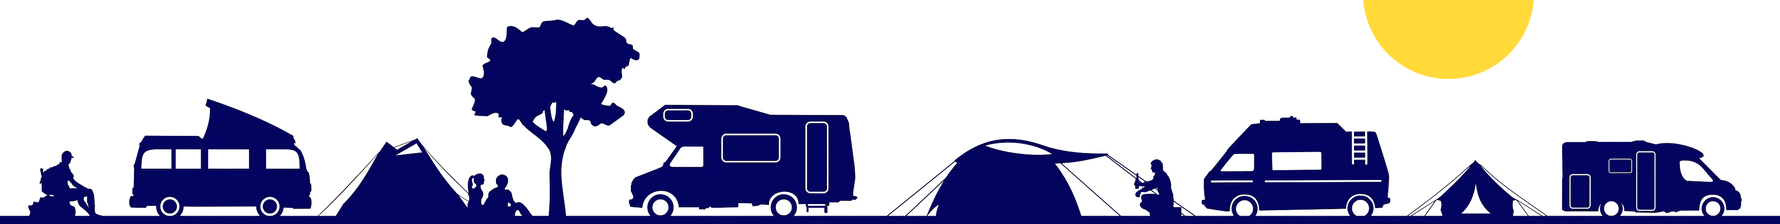 Blue silhouette of a vibrant camping scene featuring trees, people, campervans, caravans, motorhomes, tents, hikers, and a radiant sun in the sky.